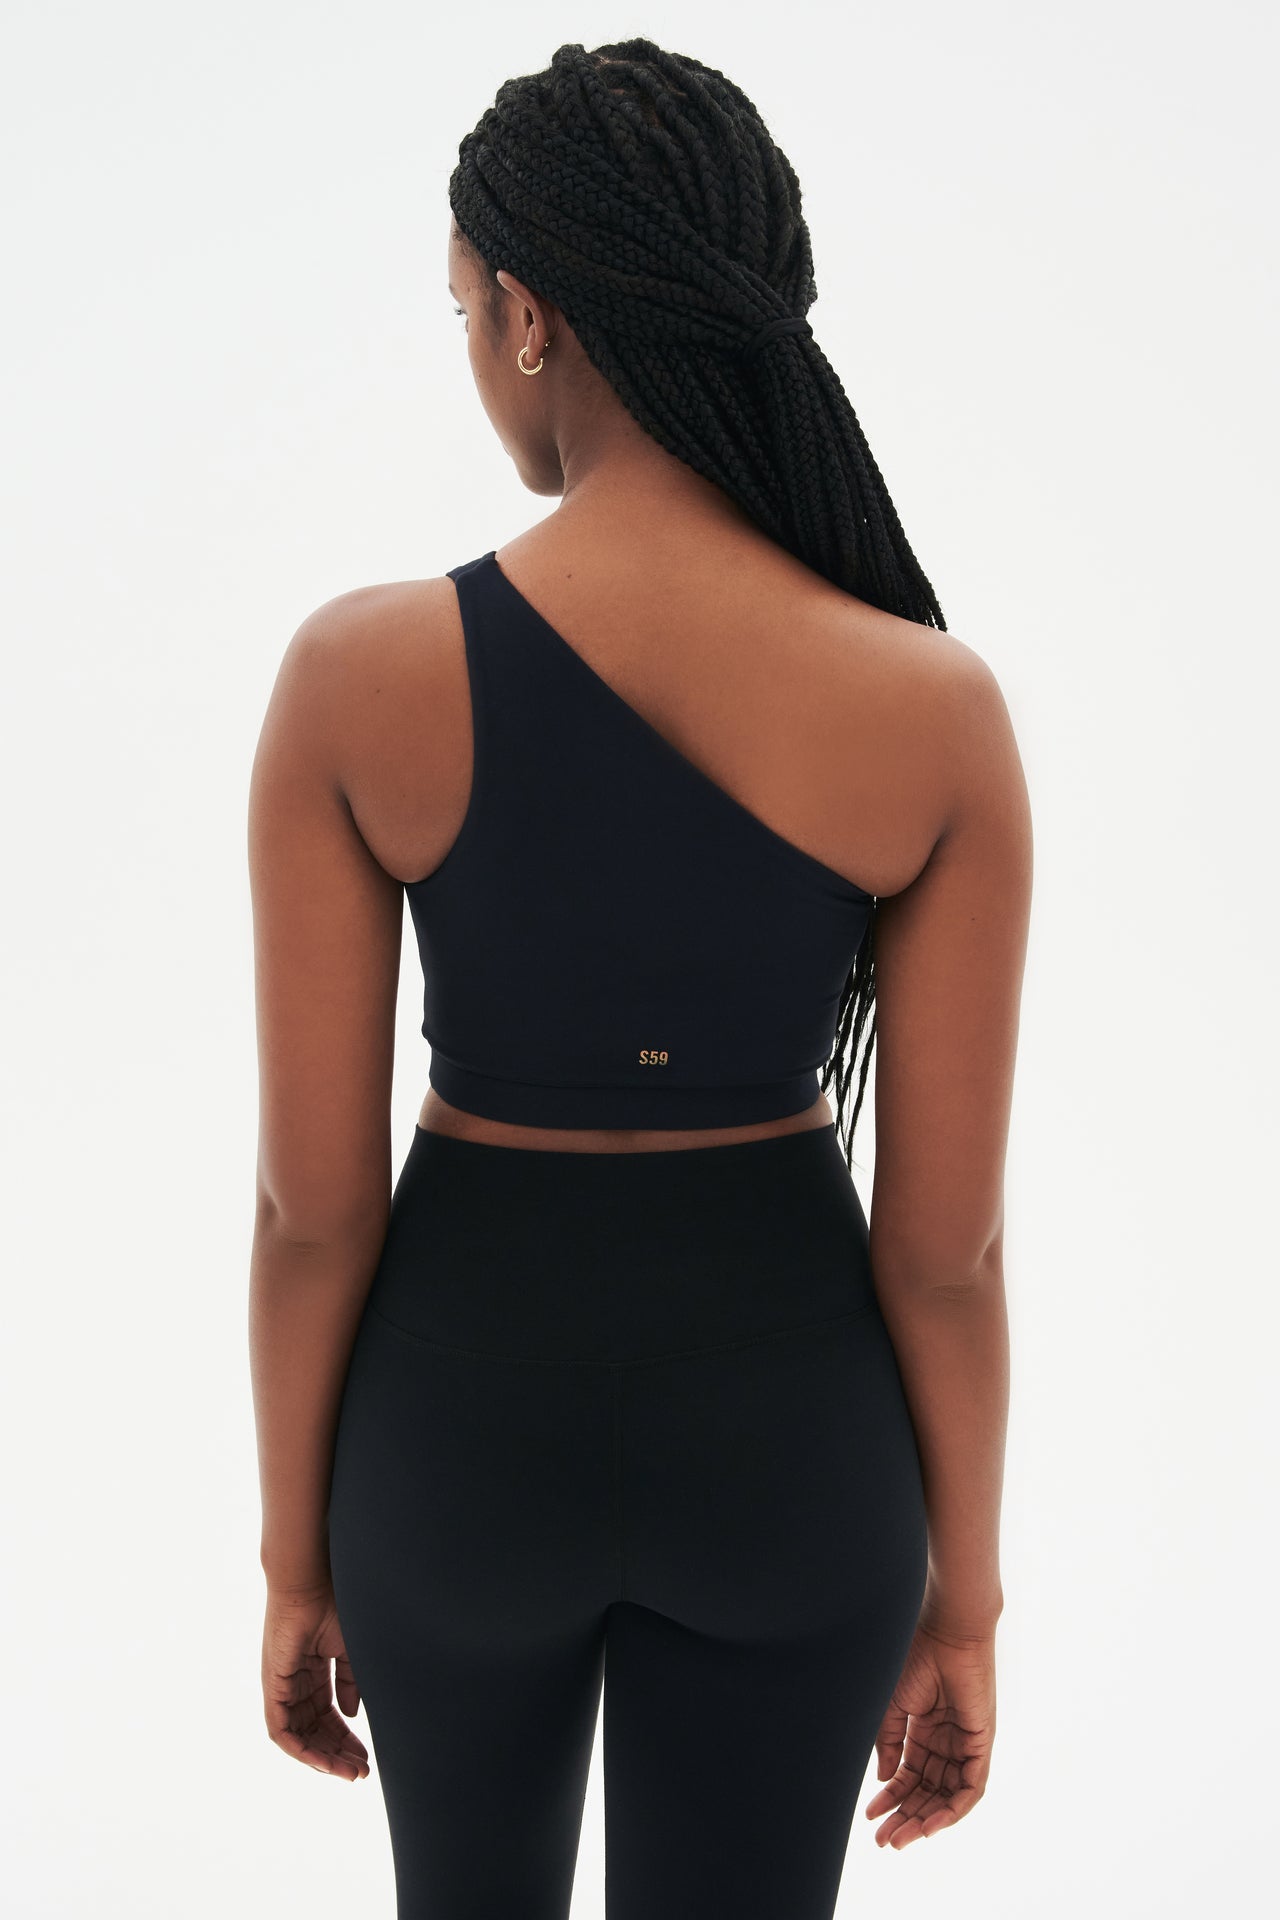 Back view of girl wearing a black one shoulder bra with small logo on the back and a black leggings with grey shoes